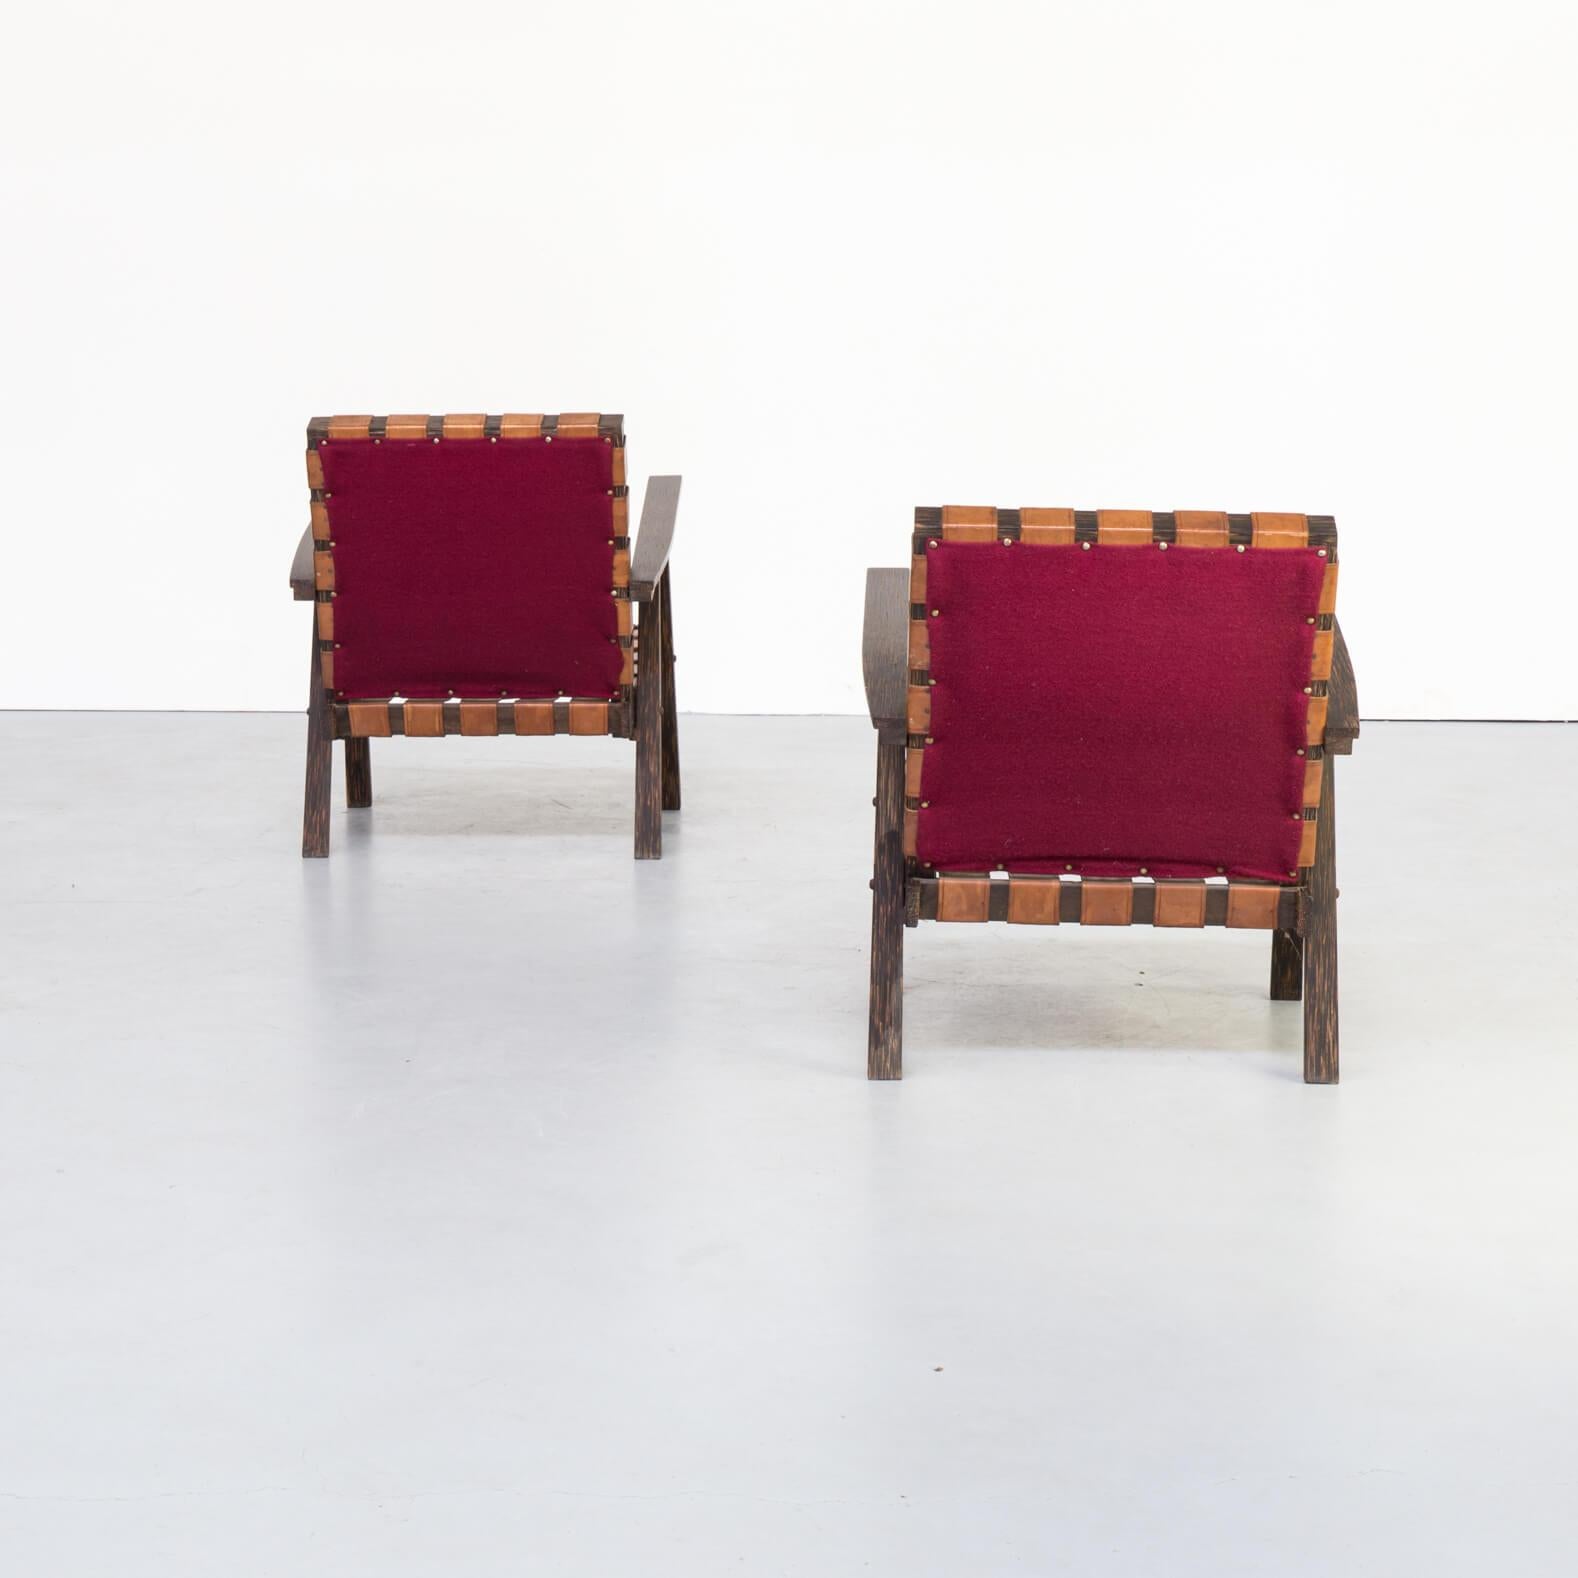 1960s Wood and Saddle Leather Fauteuil with Ottoman Set of 2 For Sale 1